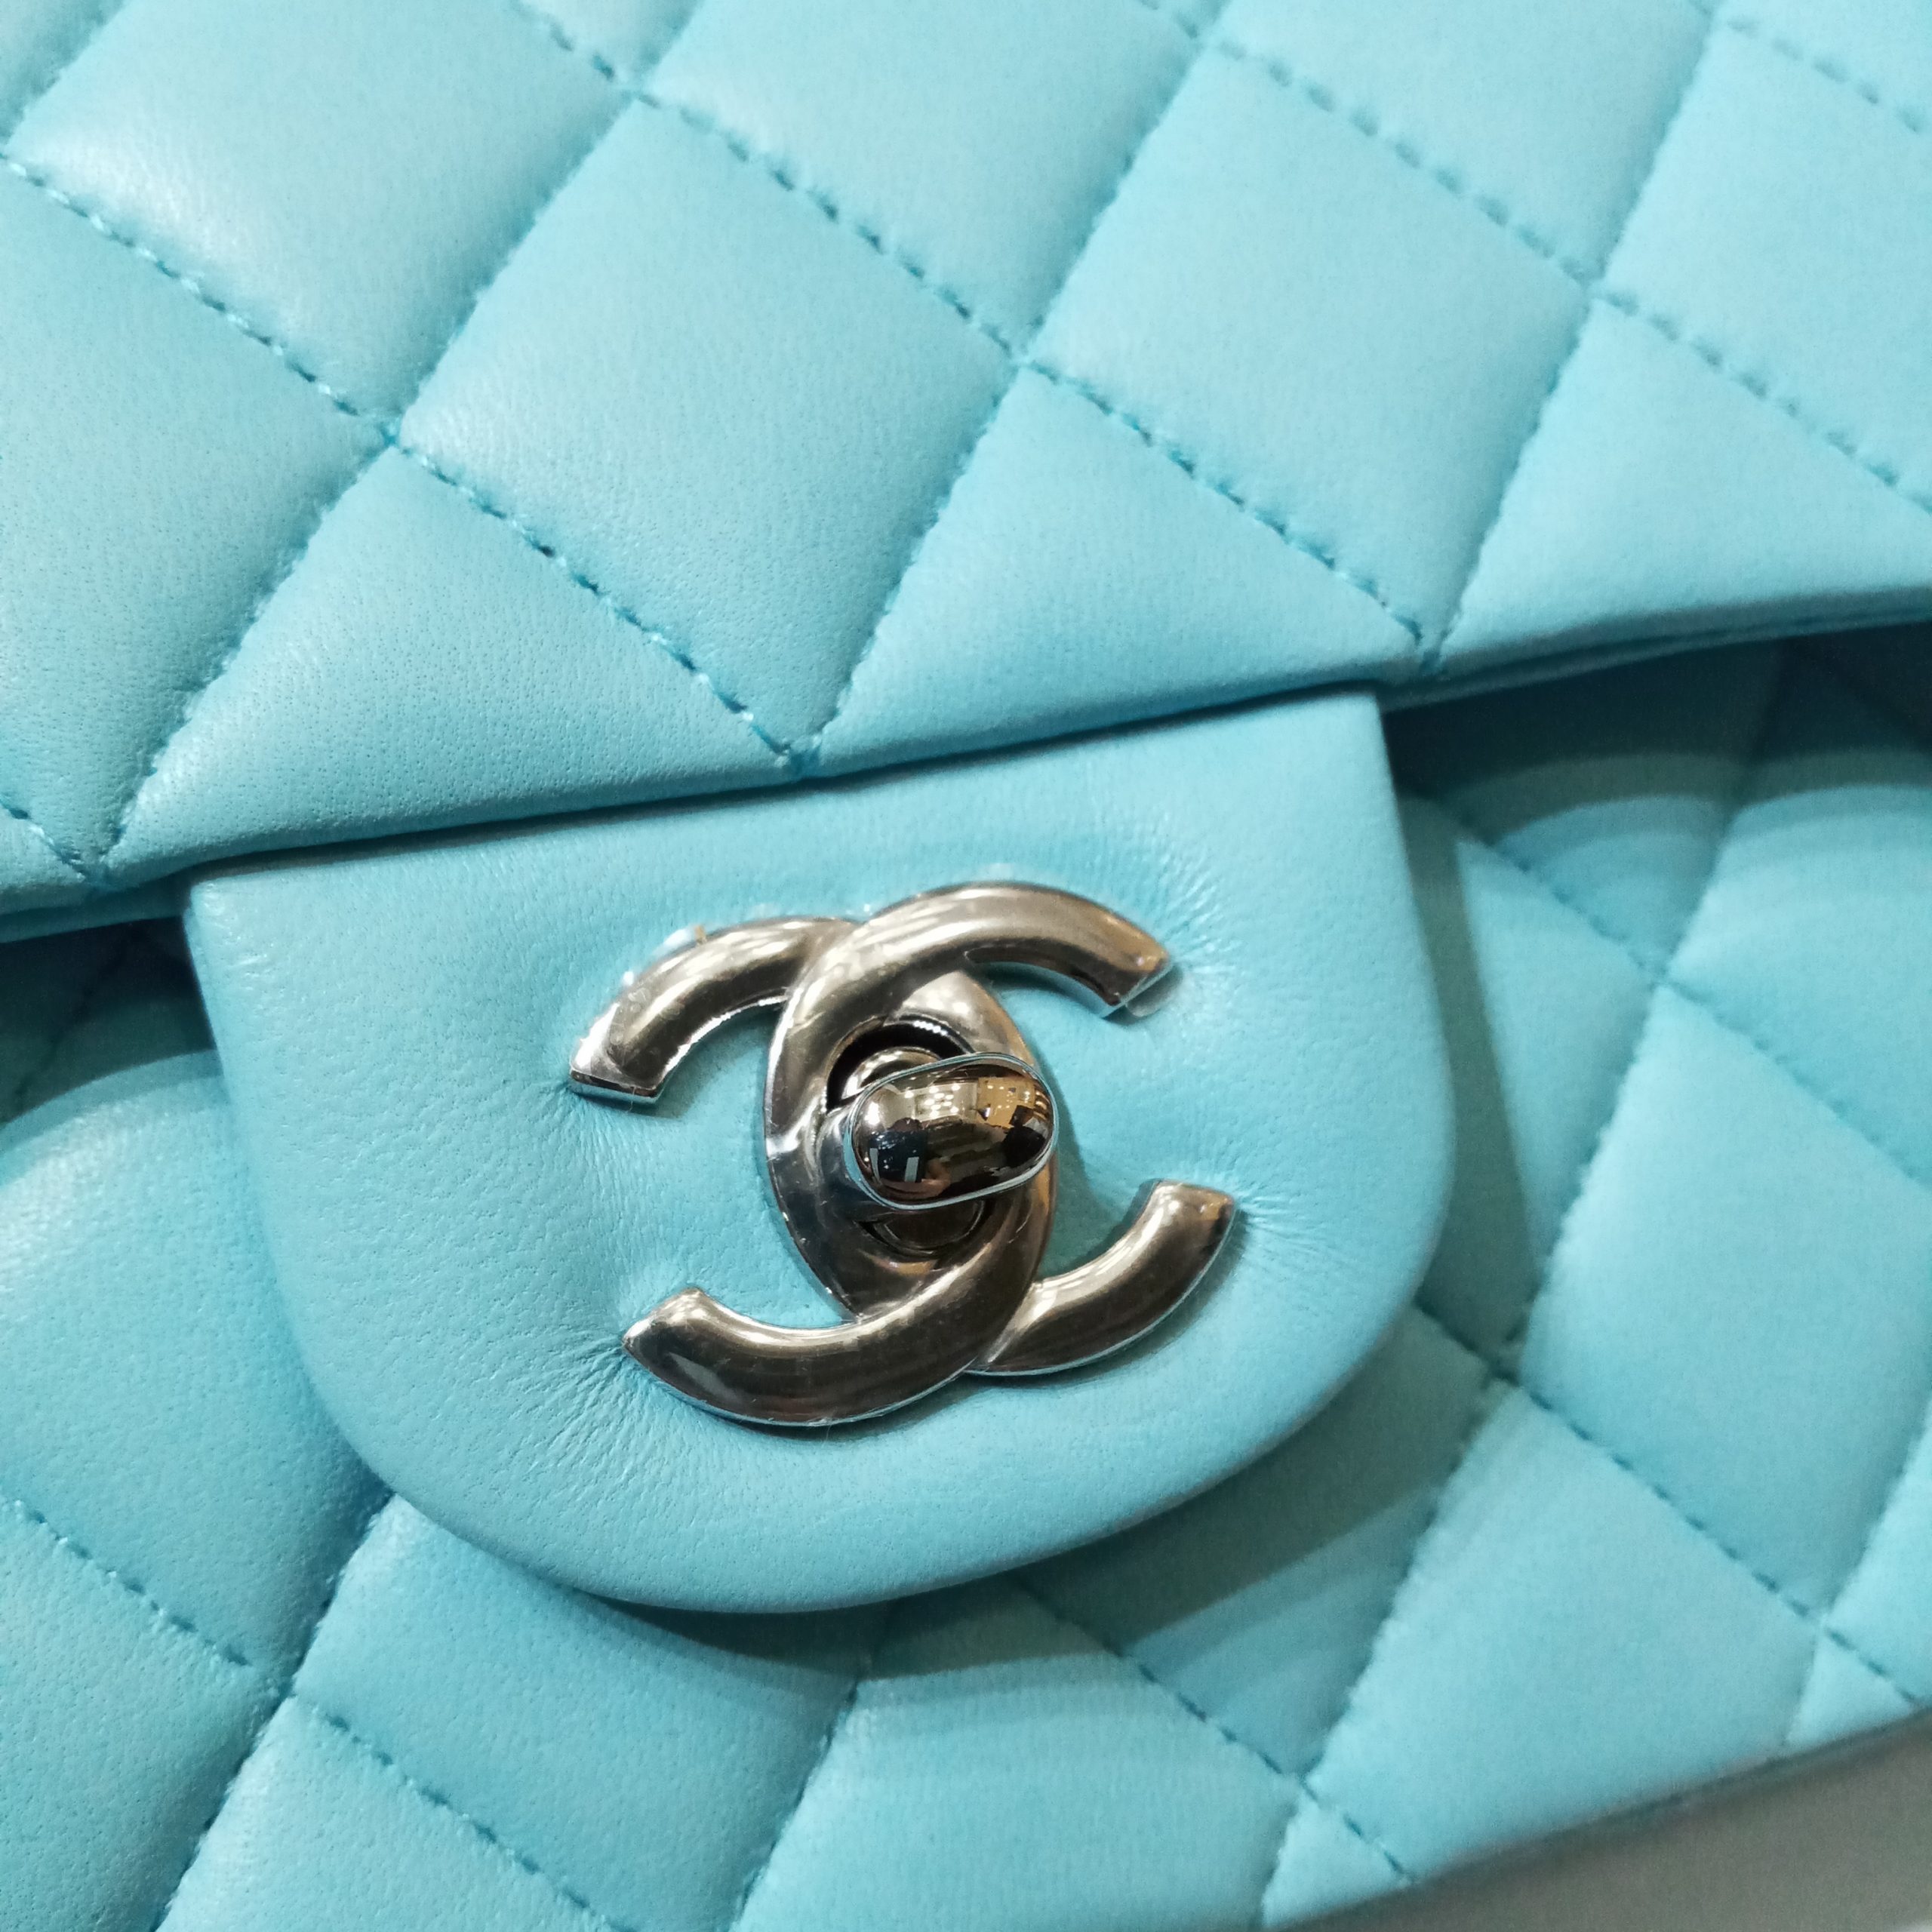 Light Blue Quilted Caviar Leather Small Classic Double Flap Bag